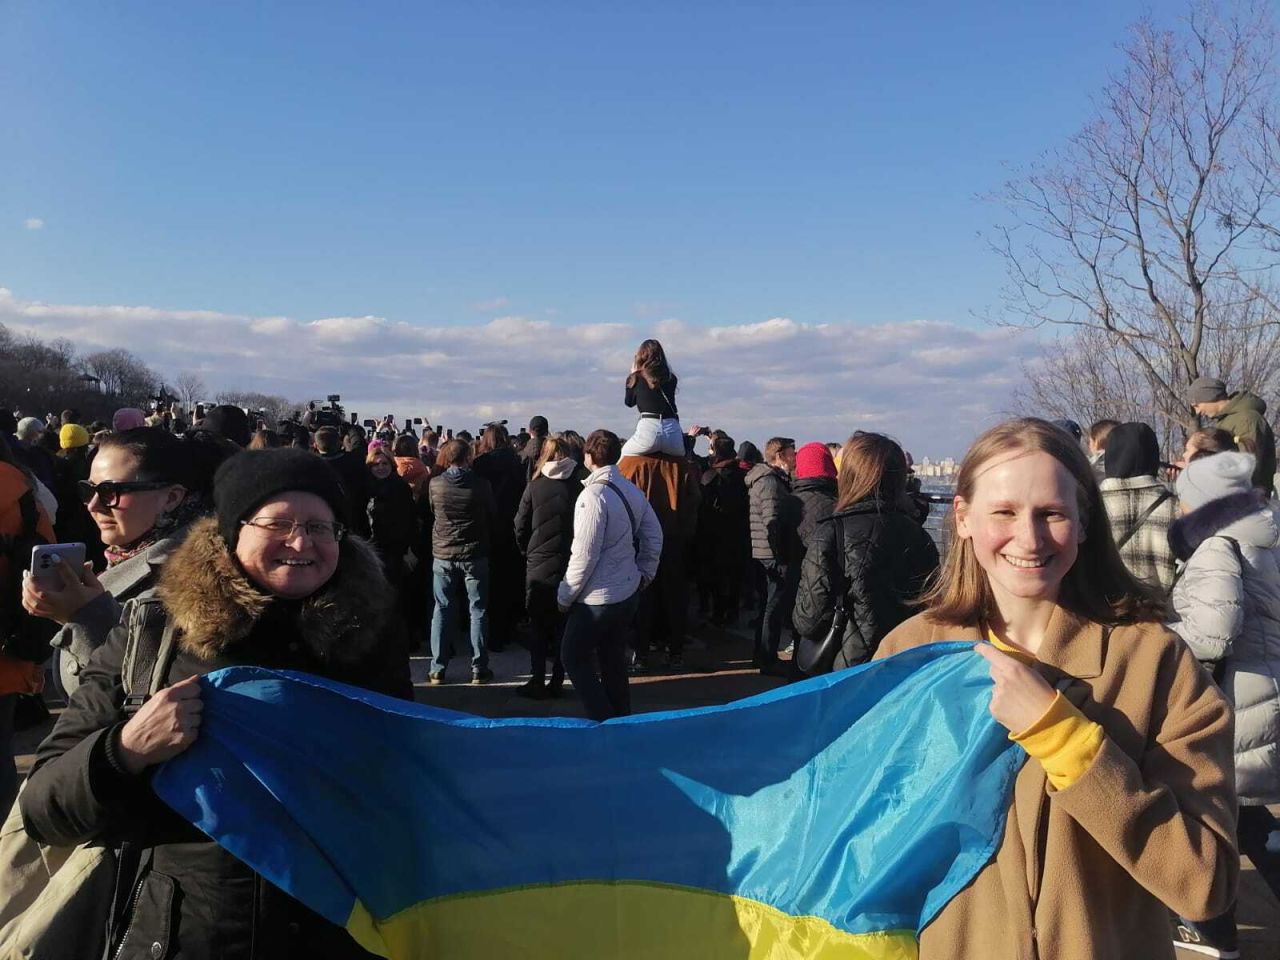 Liubov Illienko and her daughter Zhenia Tuholukova came to the concert with a large Ukrainian flag.